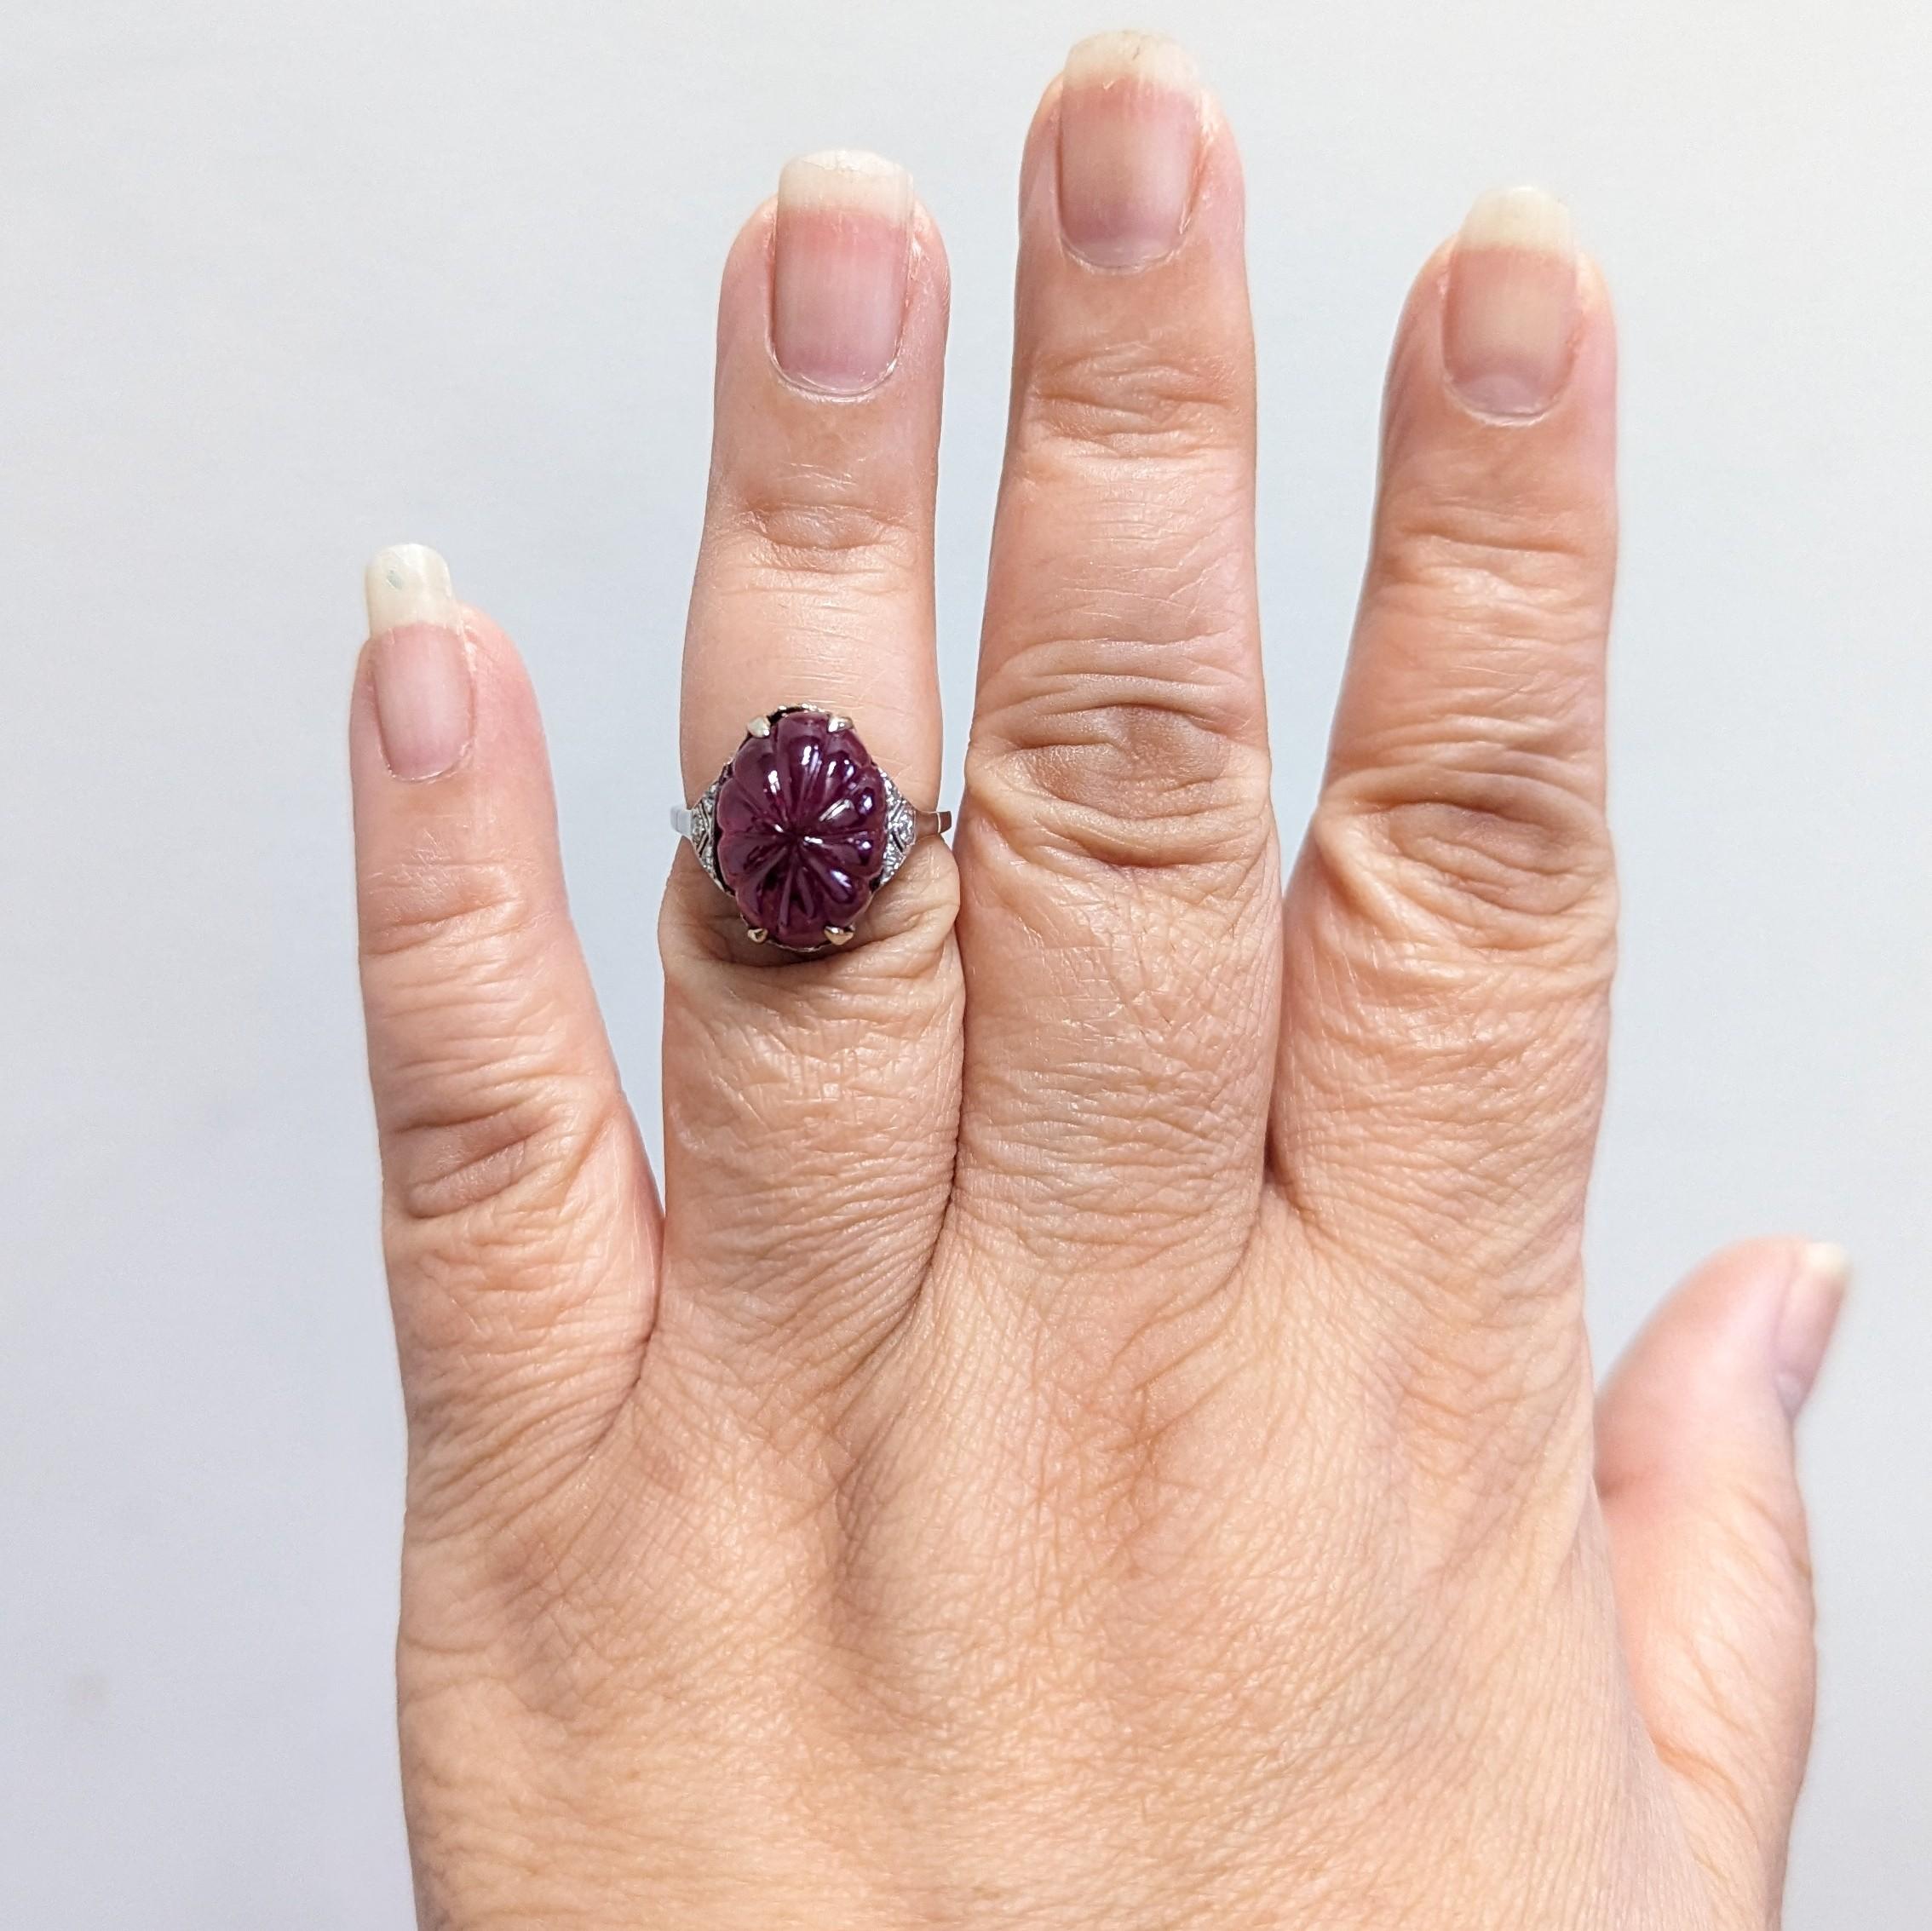 Beautiful 11.35 ct. unheated carved Burma ruby.  Ring size is 6.5.  Handmade in platinum.  C. Dunaigre certificate is included.